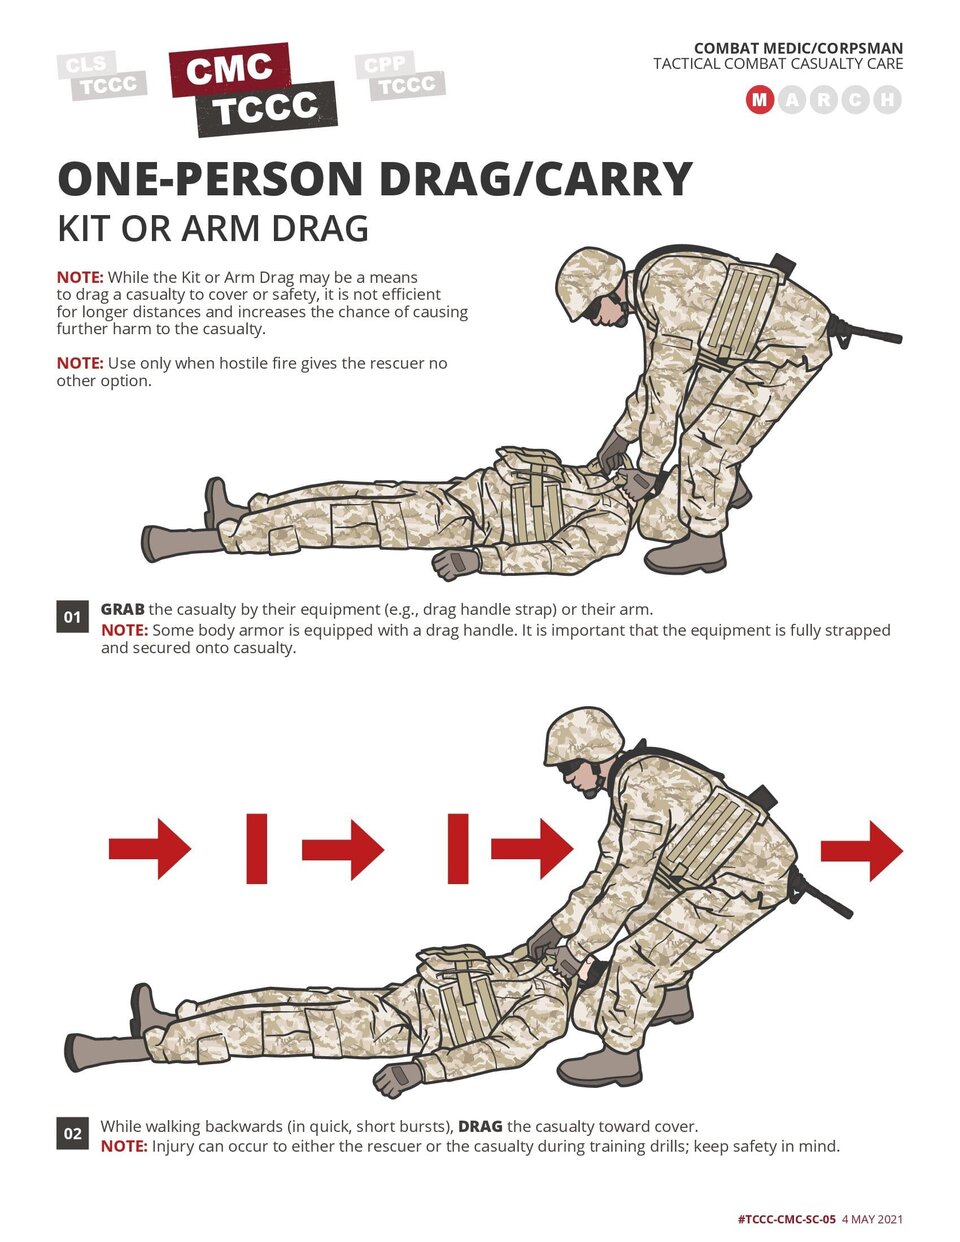 One-Person Drag/Carry Skills Card